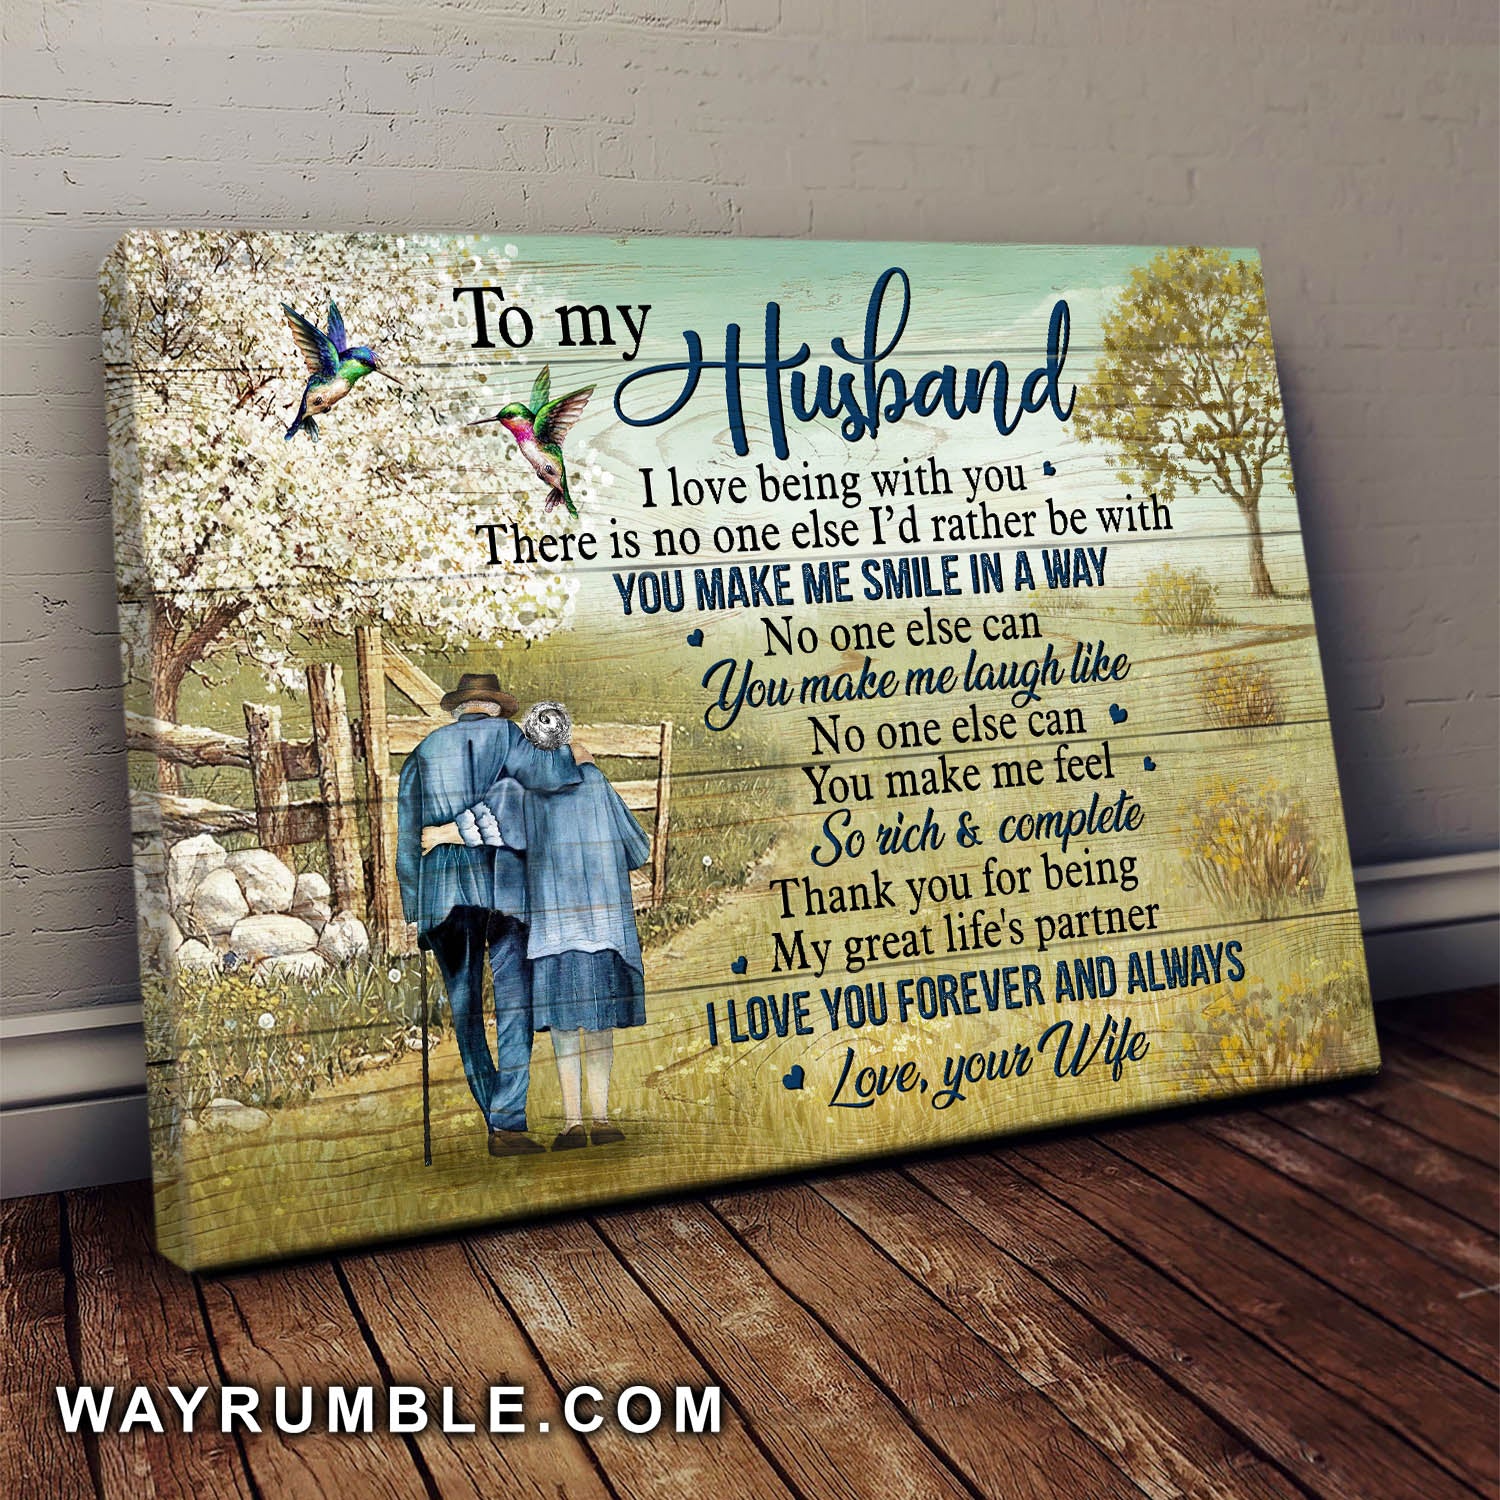 To my husband, Old Couple, On the road, Thank you for being my life partner - Couple Landscape Canvas Prints, Wall Art